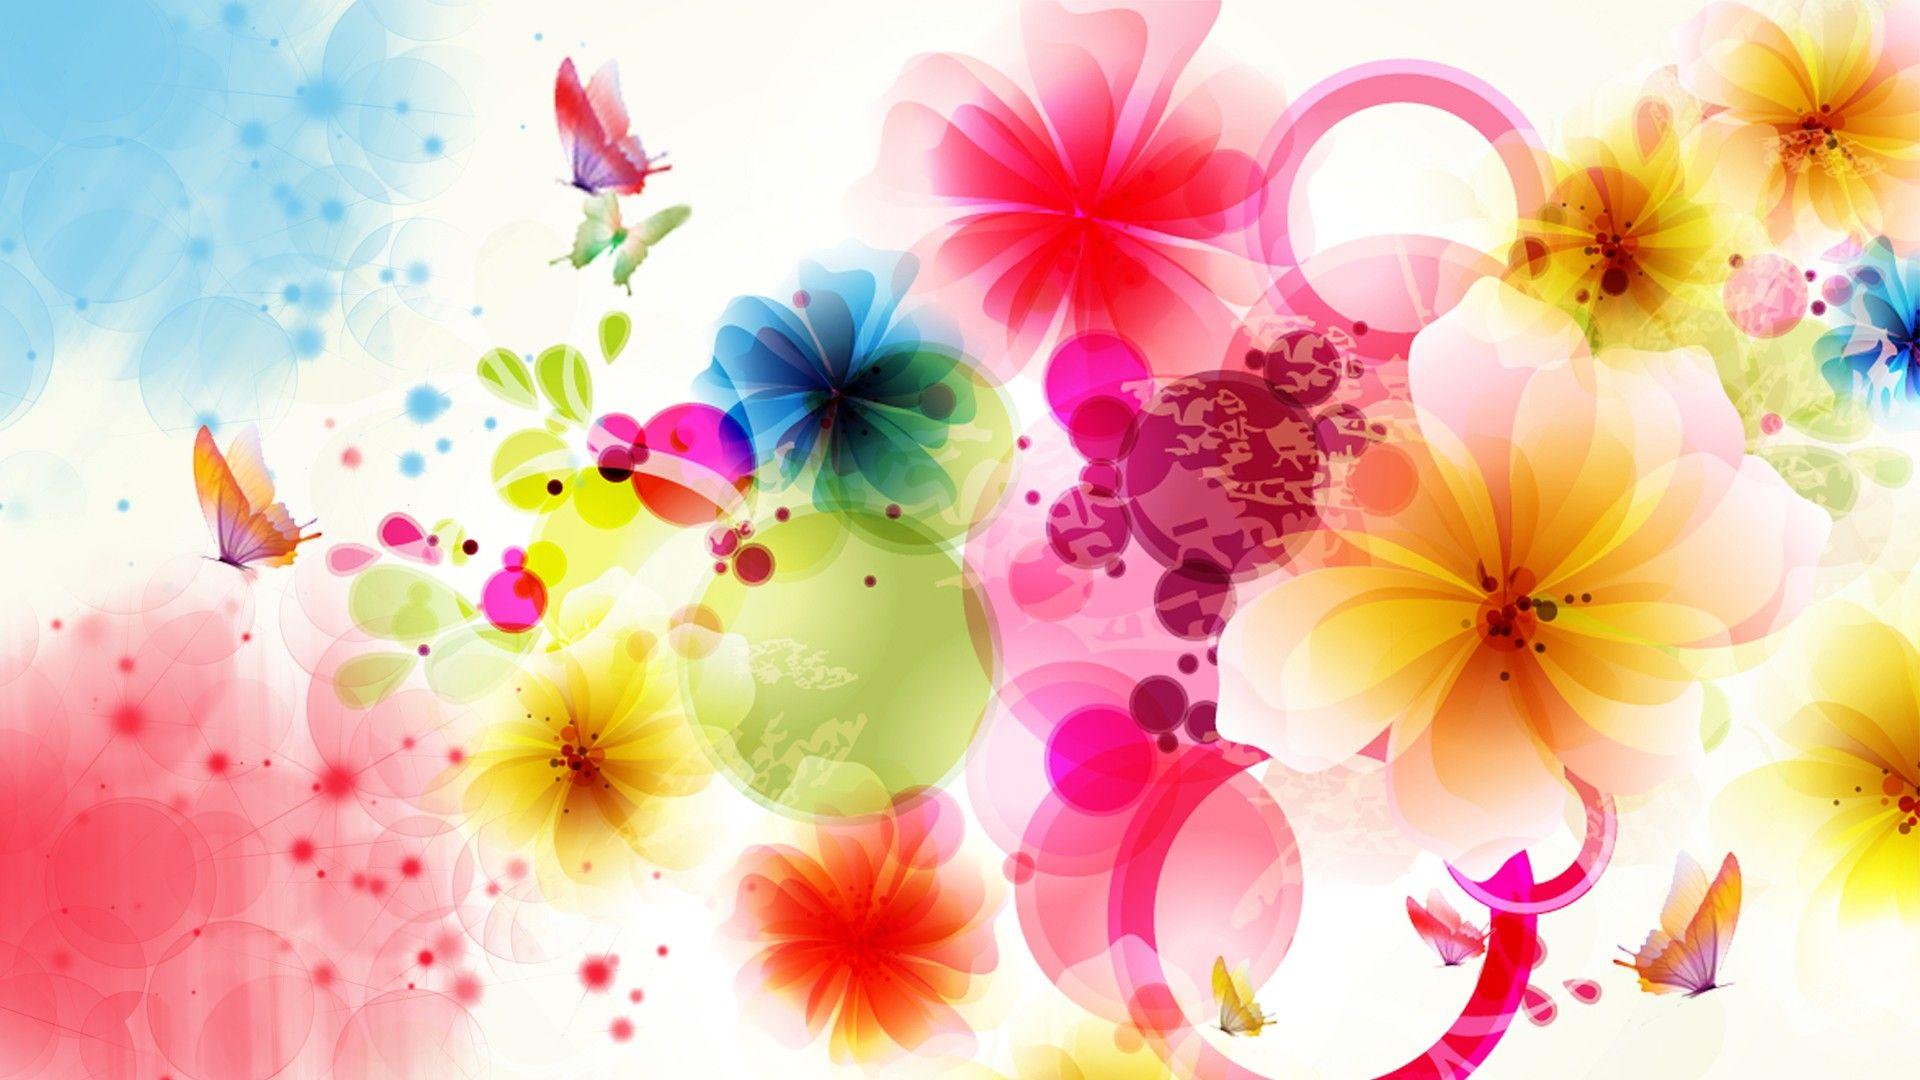 Abstract Flower, High Definition, High Quality, Widescreen